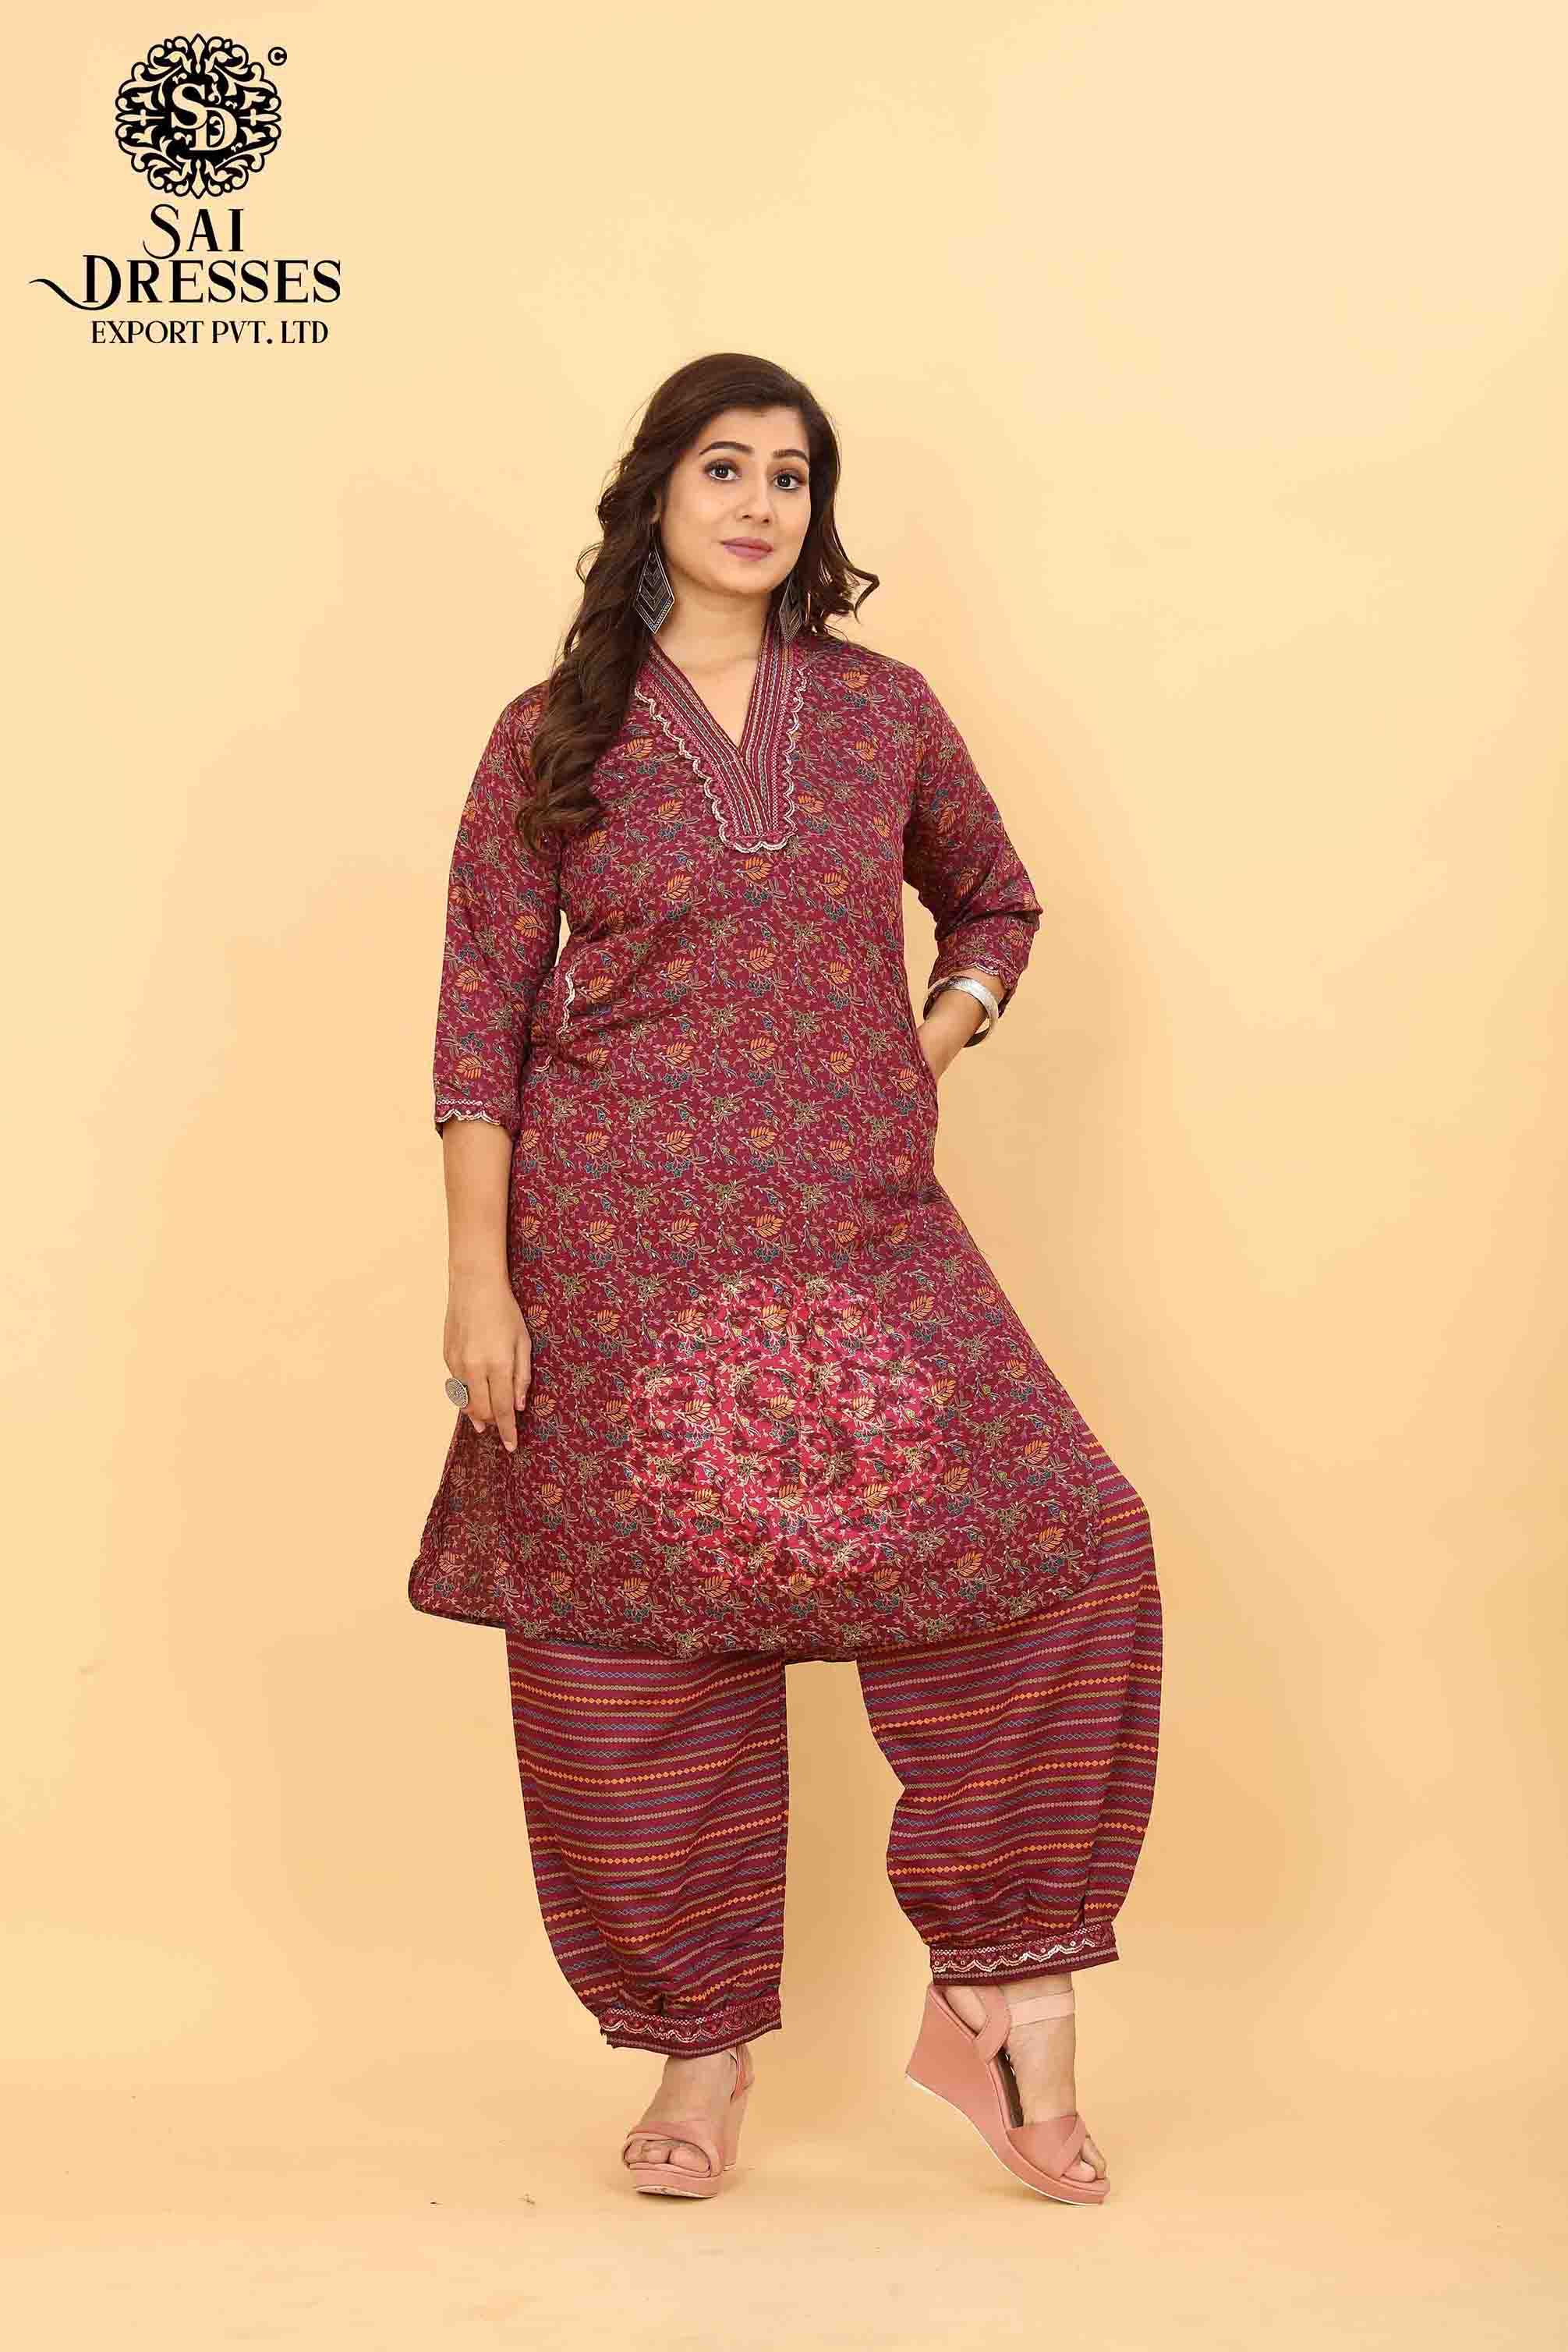 SAI DRESSES PRESENT D.NO SD 5019 READY TO EXCLUSIVE TRENDY WEAR PATHANI KURTA WITH AFGHANI PANT STYLE COMBO COLLECTION IN WHOLESALE RATE IN SURAT